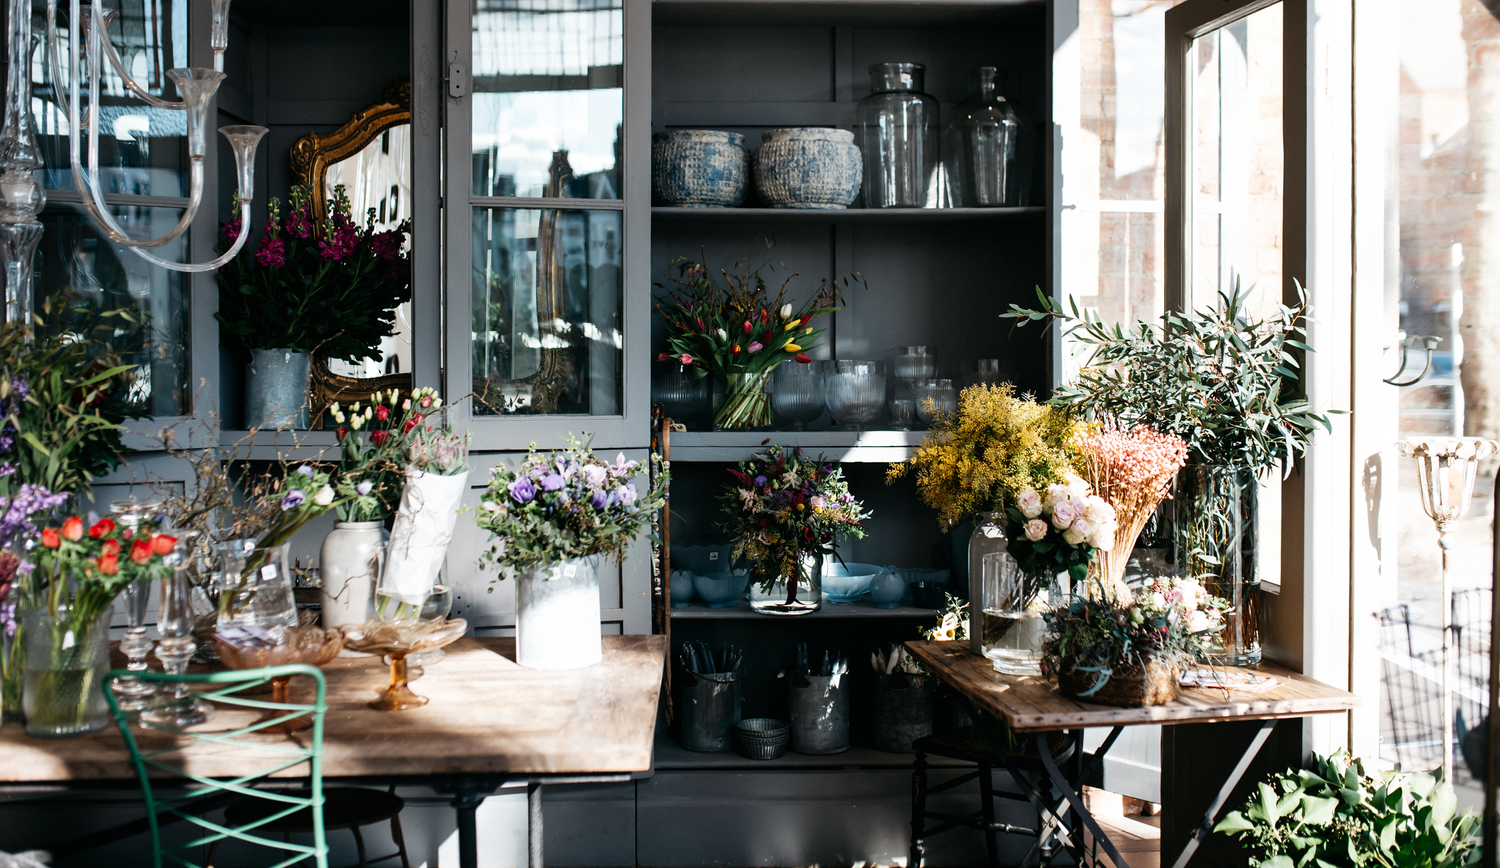 Interior of a flower shop with vases and flowers